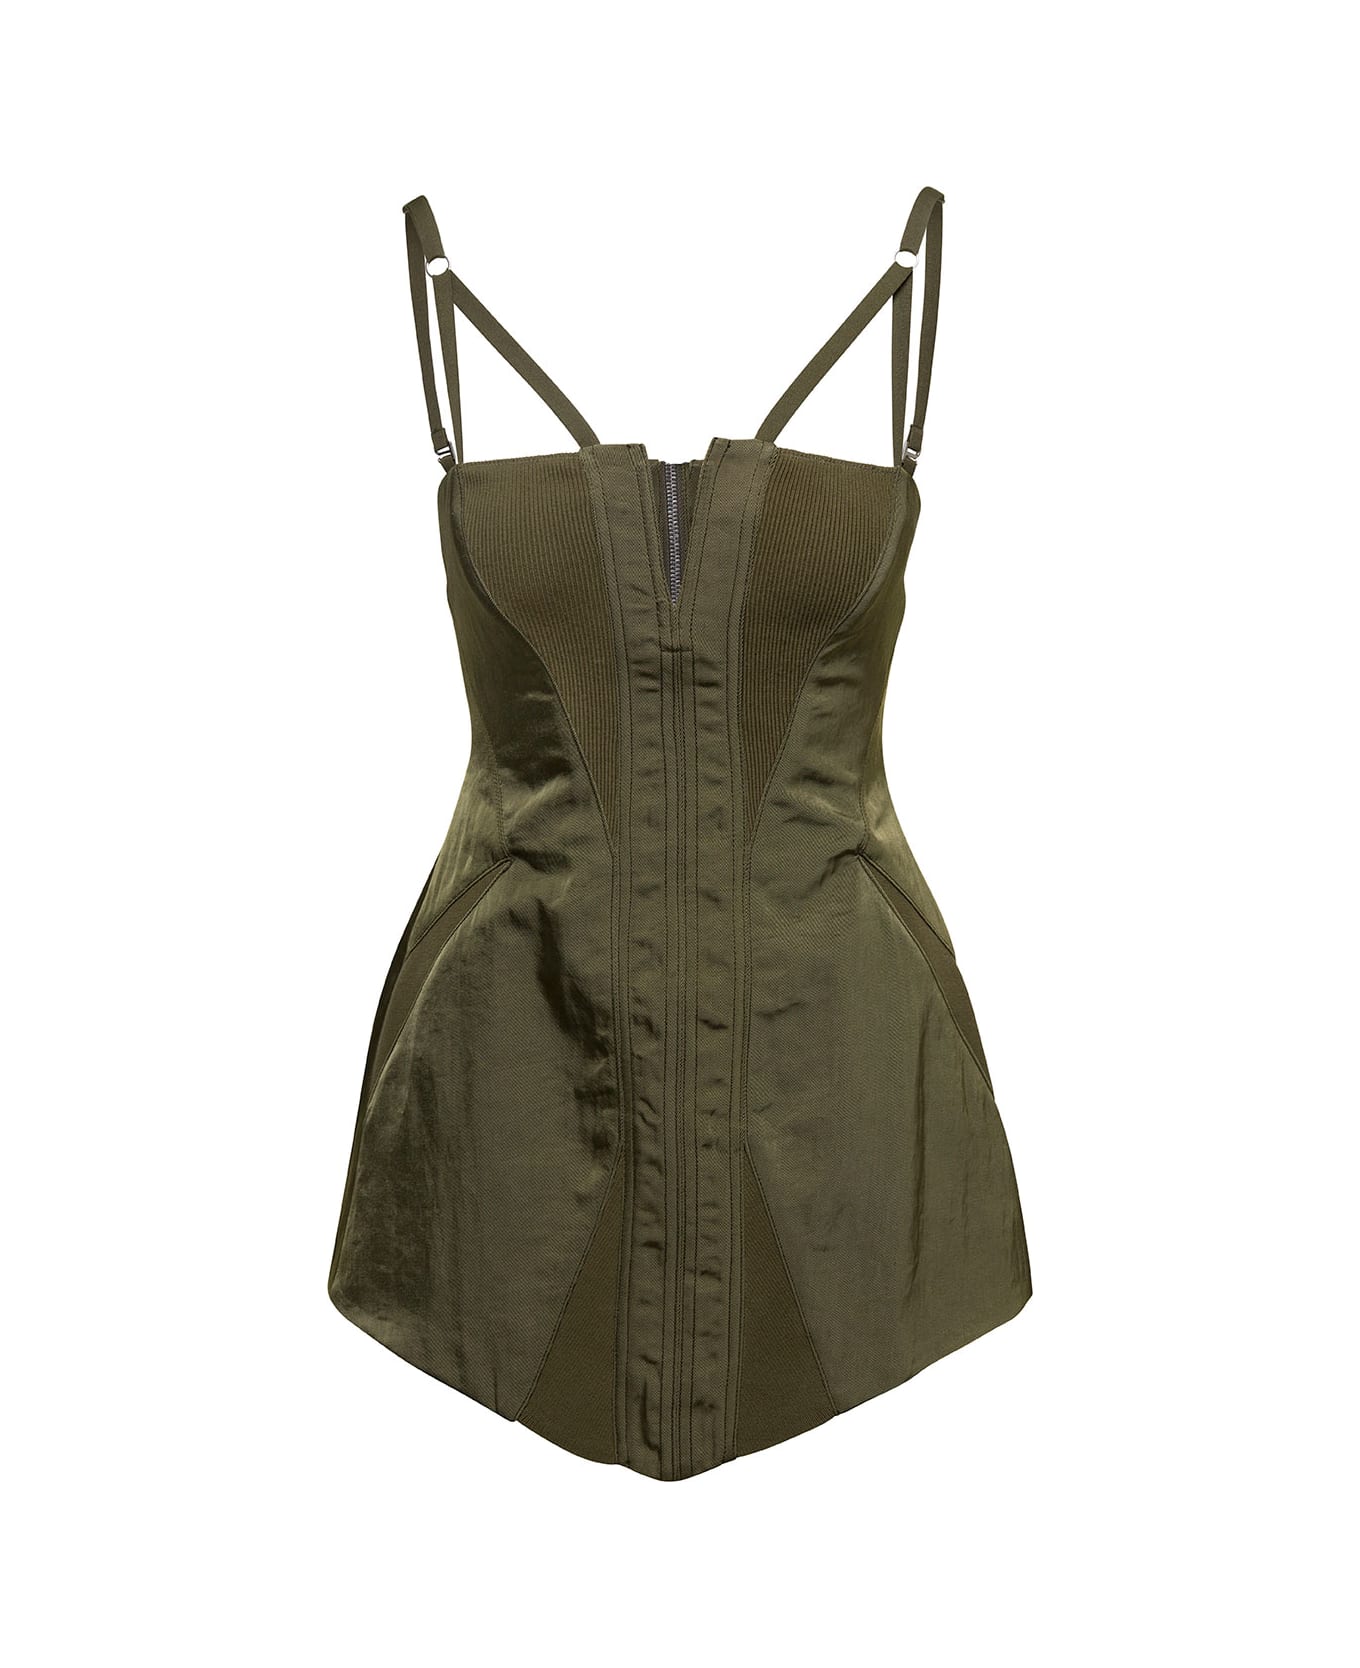 Dion Lee Green Sleeveless Minidress With Contouring Panel Construction In Nylon Woman - Green ワンピース＆ドレス